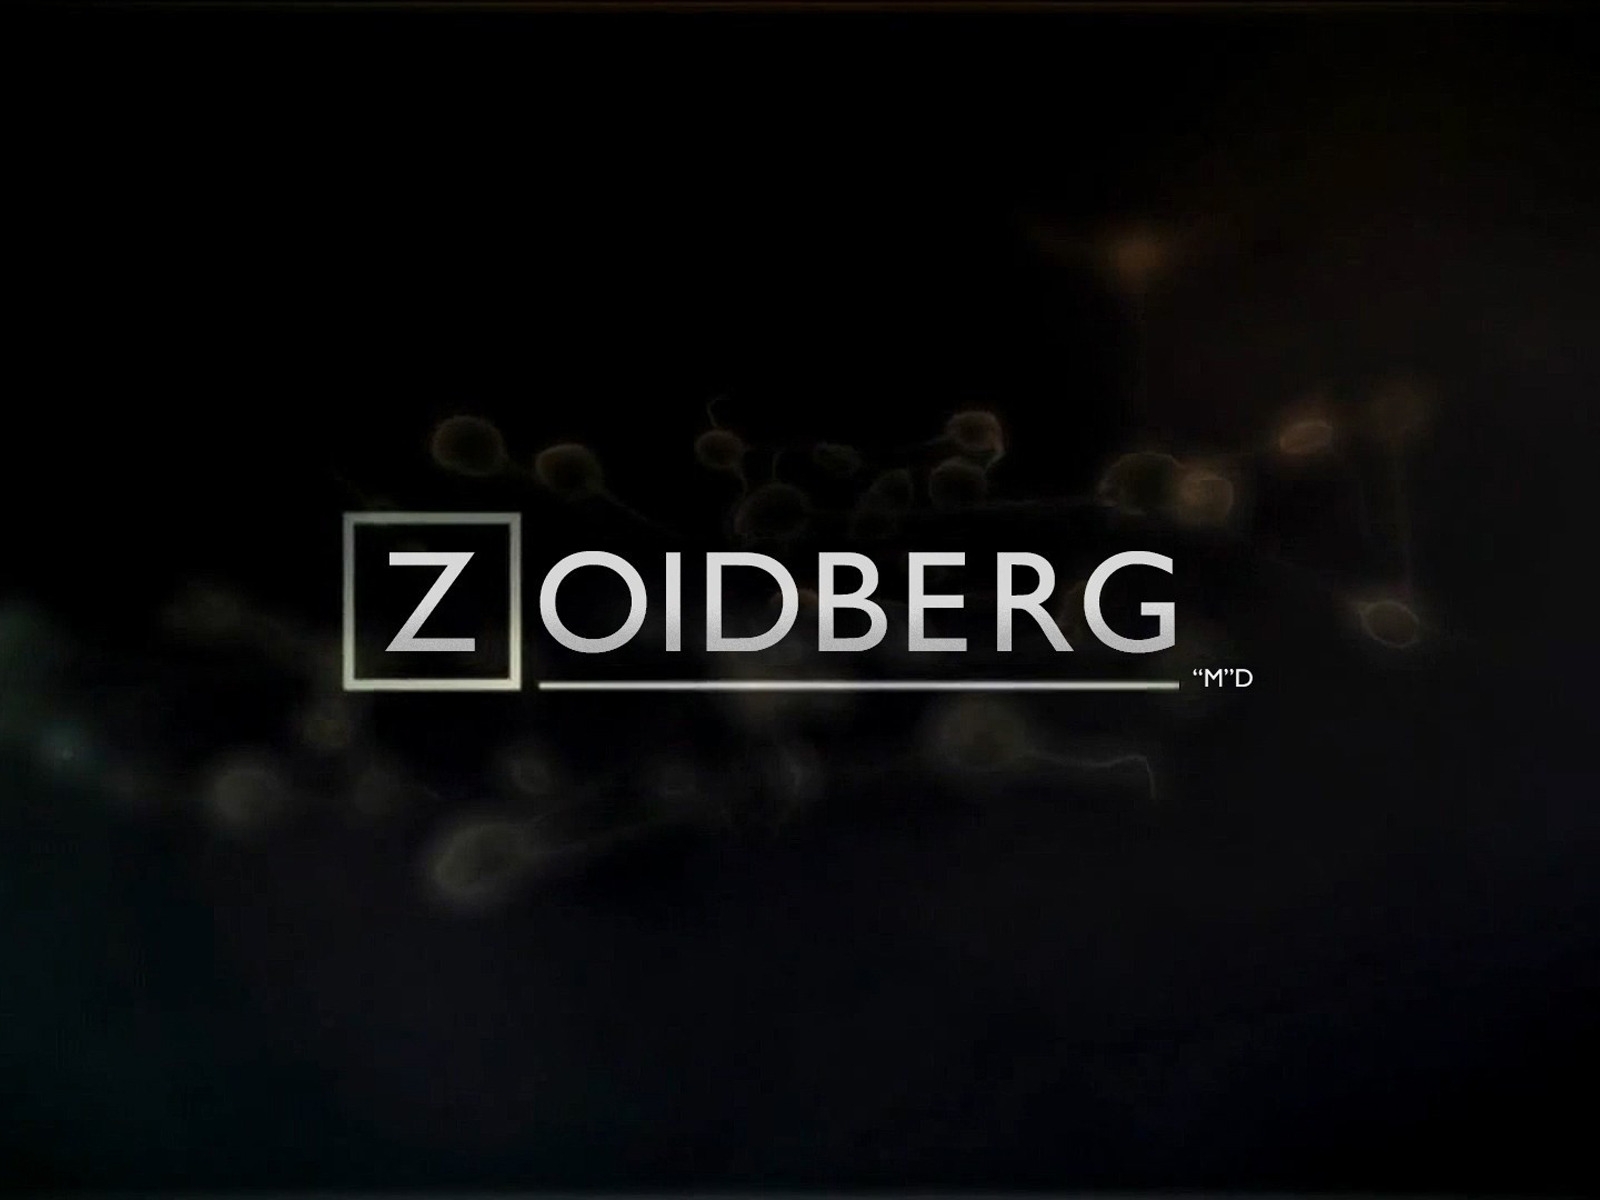 Zoidberg MD for 1600 x 1200 resolution